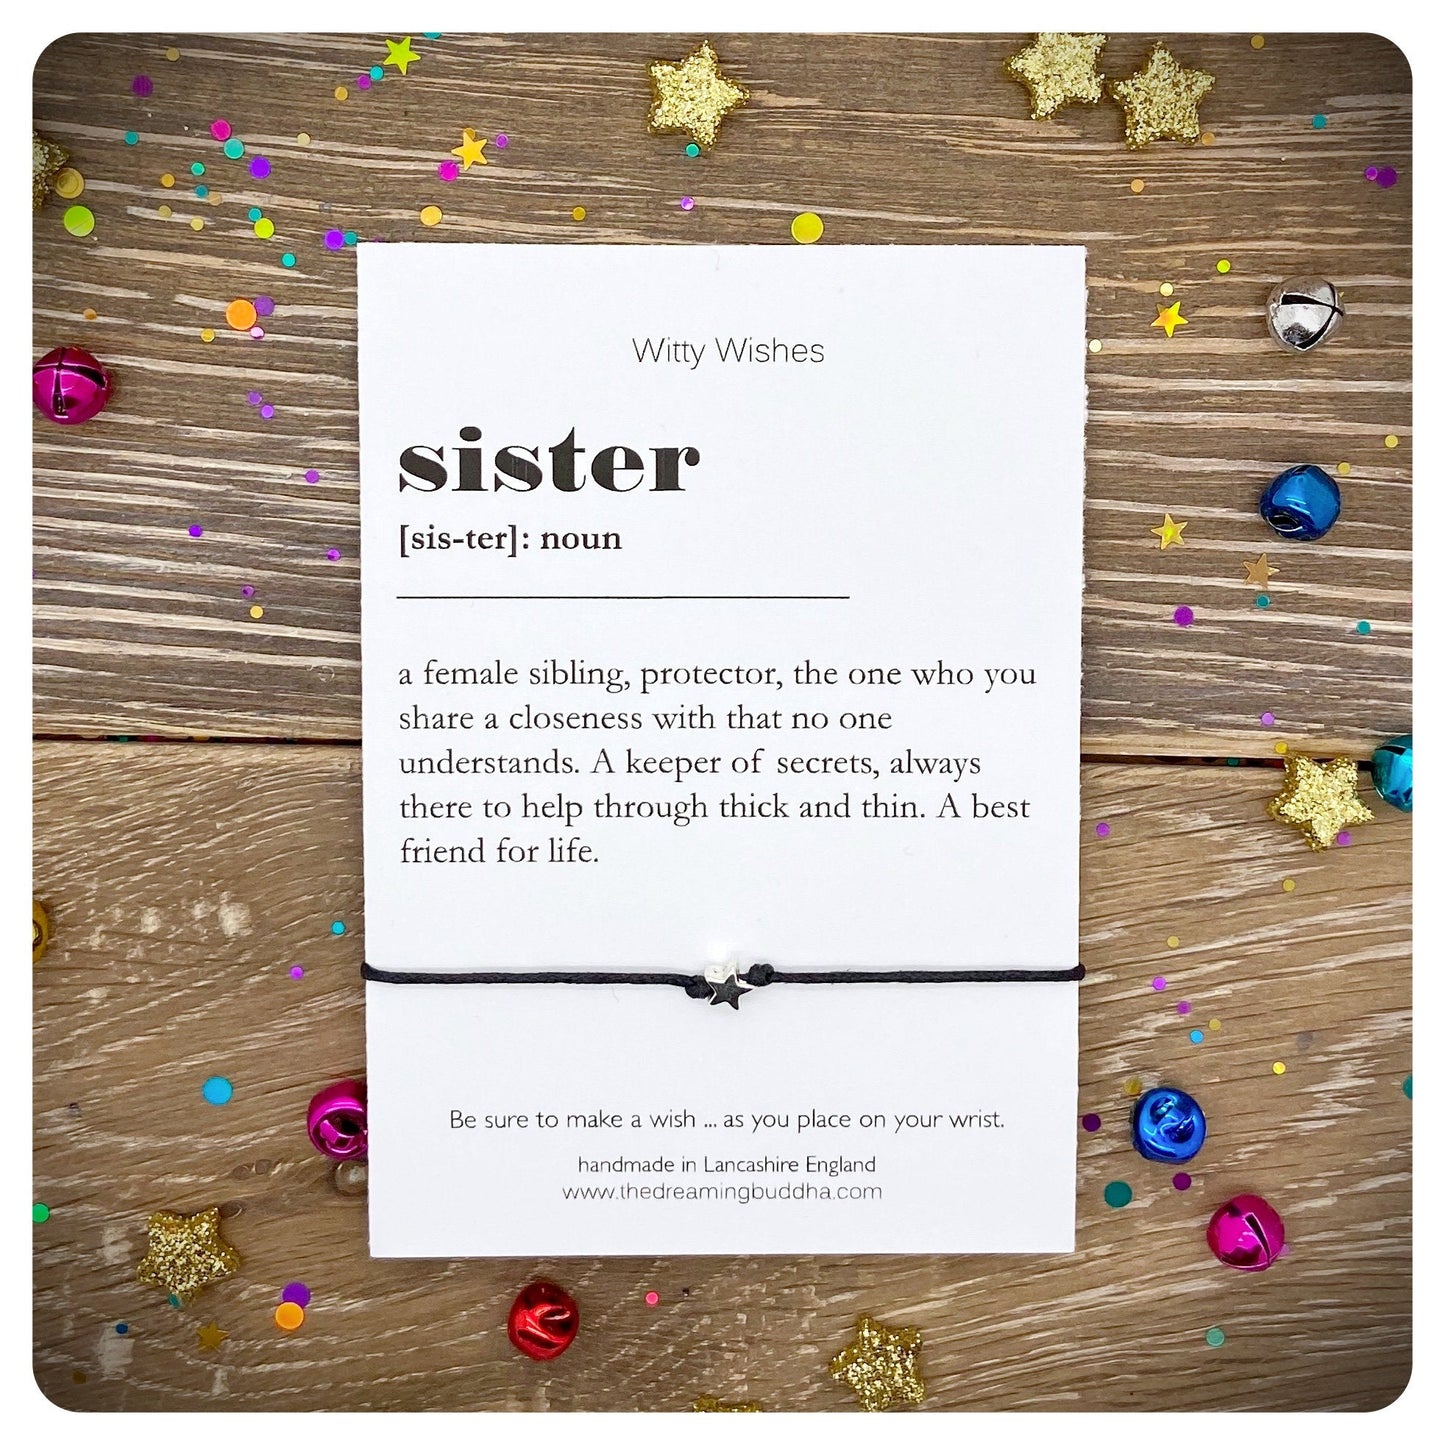 Sister Dictionary Definition, Sibling Wish Bracelet, Sister Gift, Sister Wish Bracelet, Twin Birthday Gift.